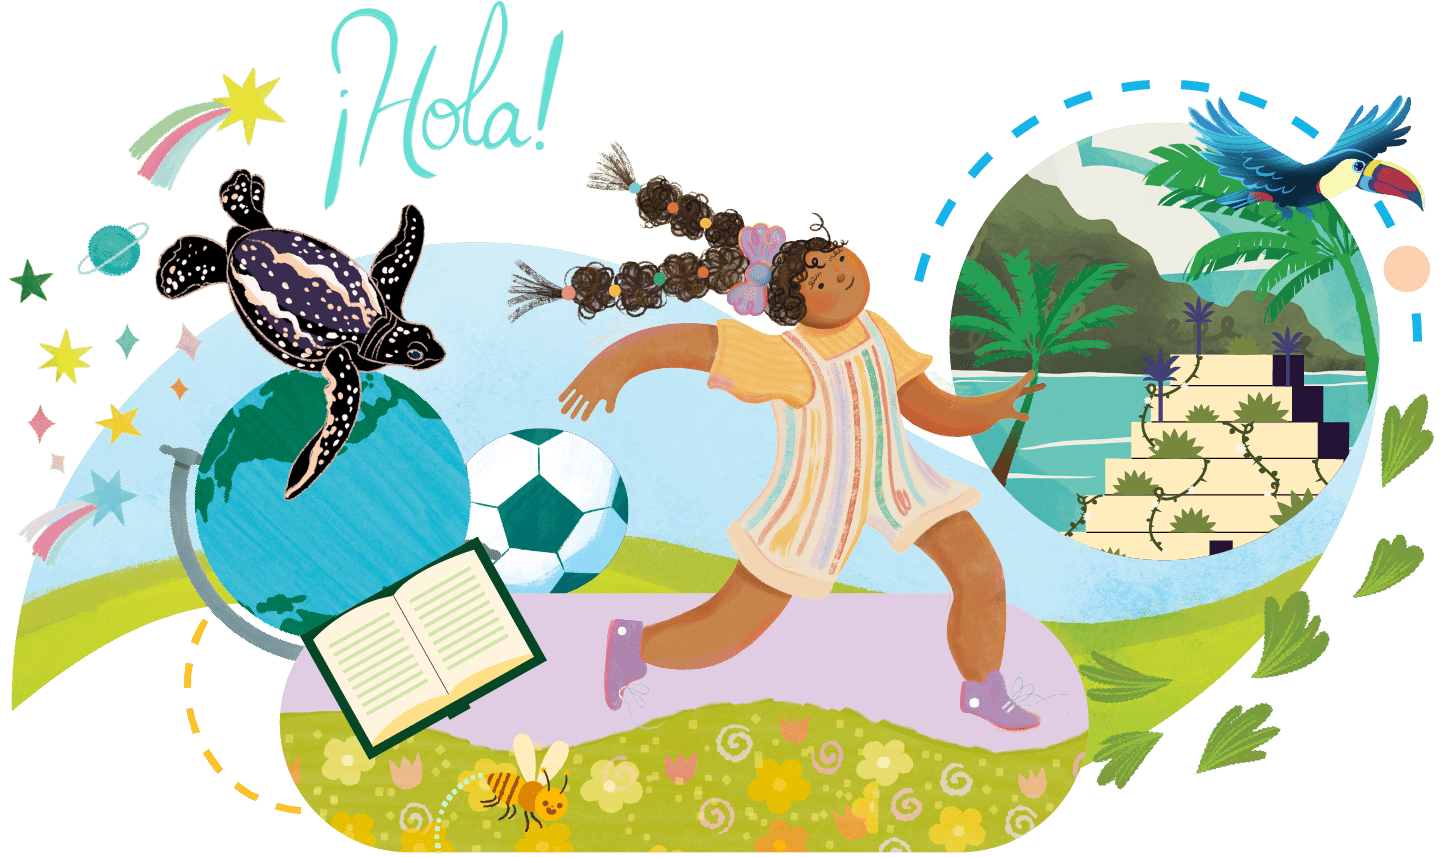 Illustration of a joyful girl playing soccer, surrounded by diverse elements including a turtle, hummingbirds, a book from the CKLA reading program, and lush greenery, with a greeting 